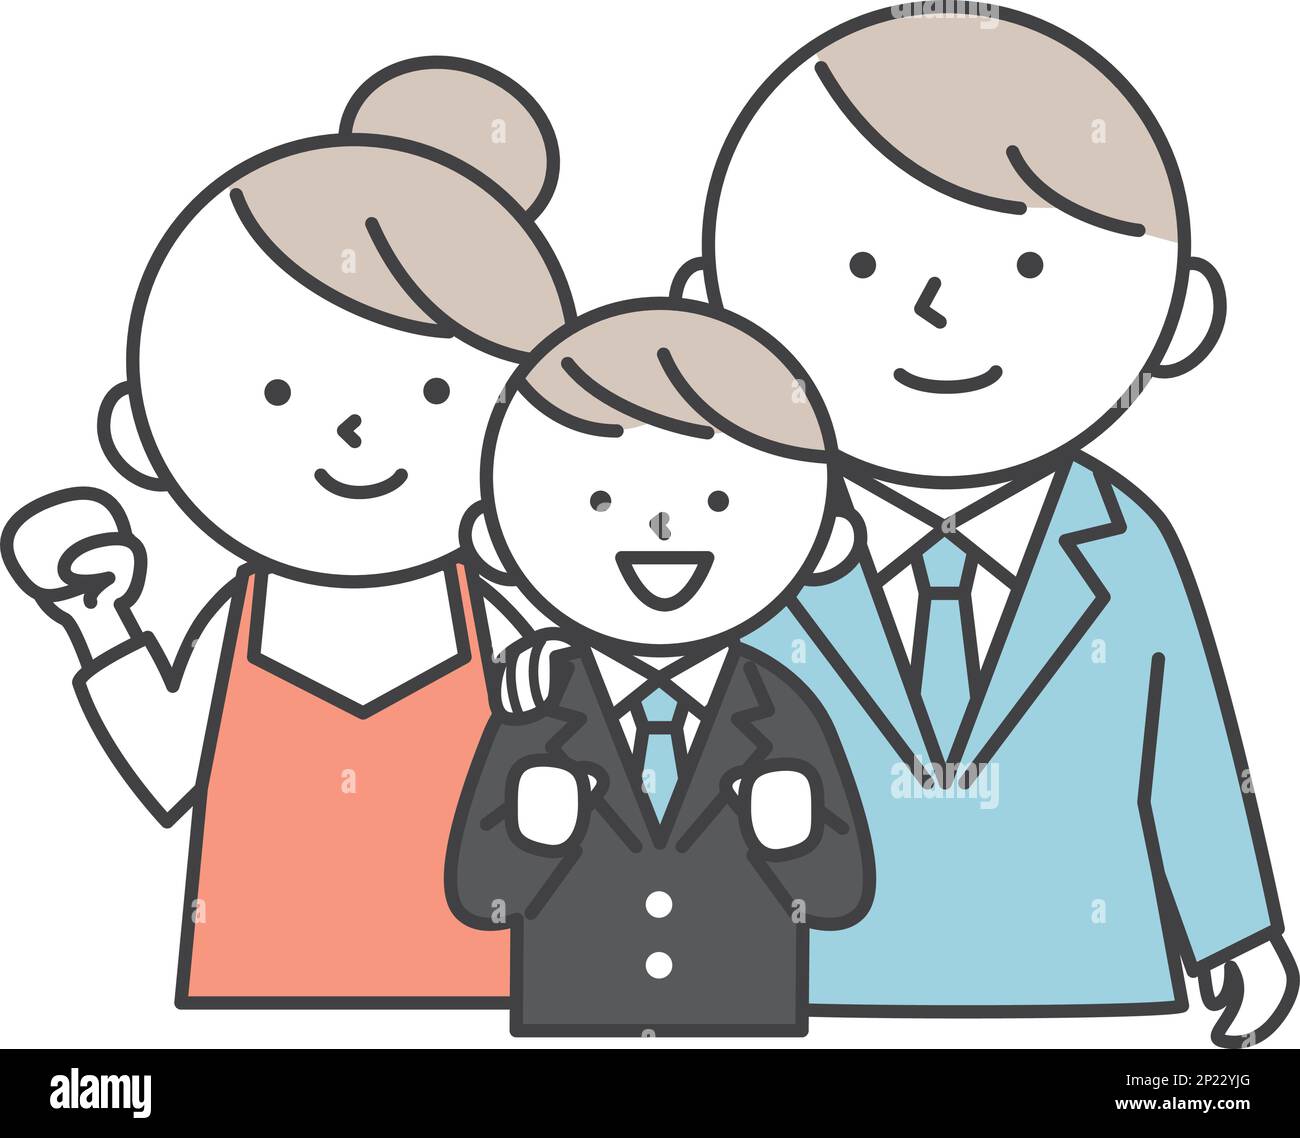 A smiling male student in a blazer uniform and his parents. Family illustration of son and parents. Simple style illustrations with outlines. Stock Vector